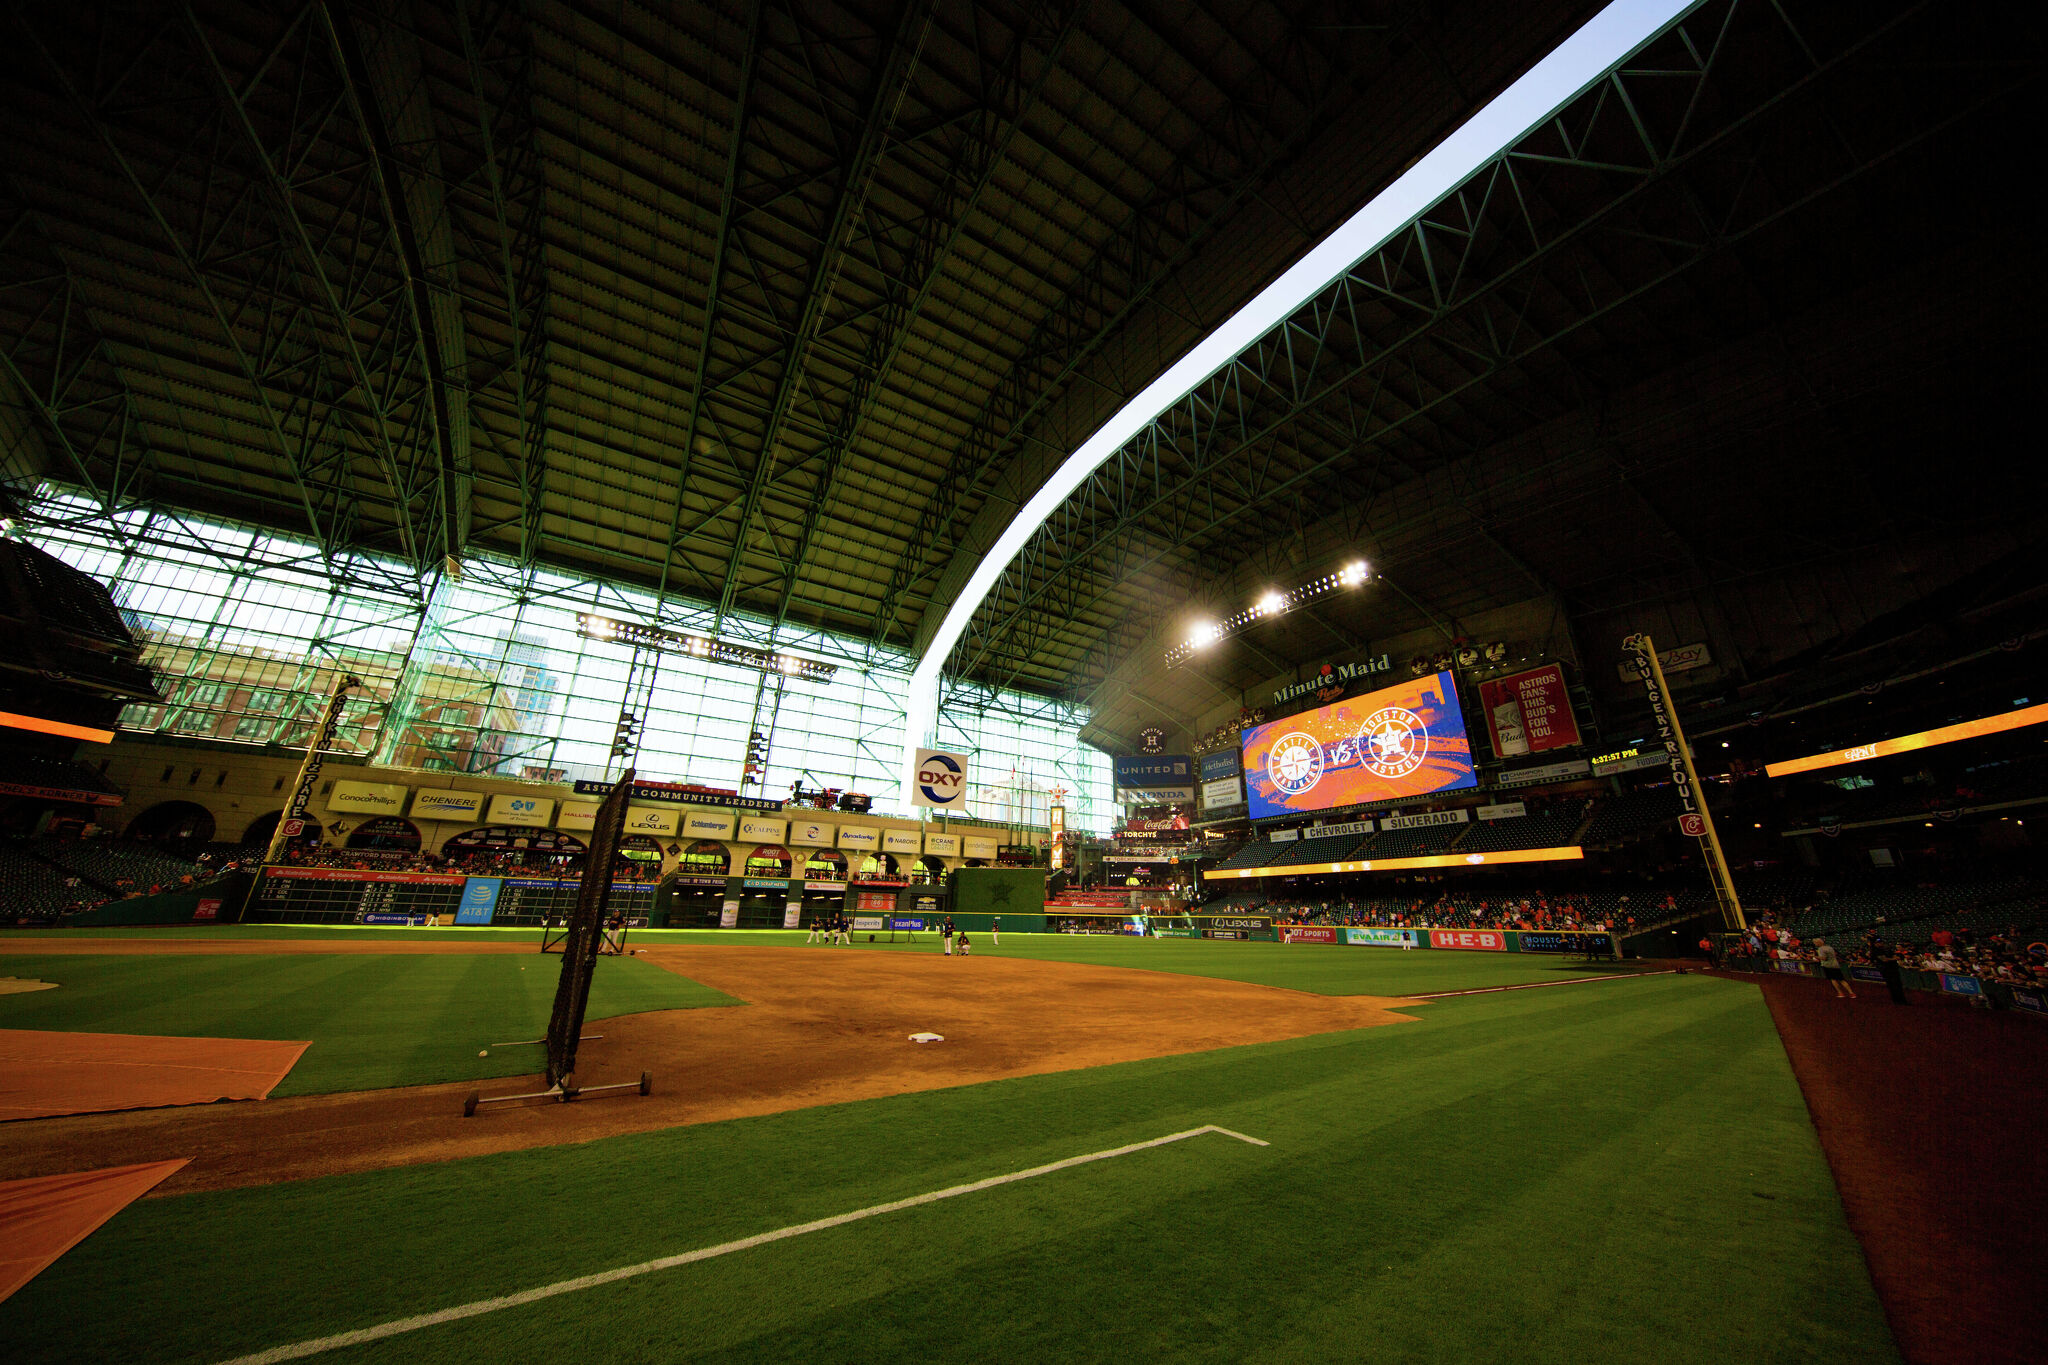 Will the roof be closed for Game 2 of the World Series?